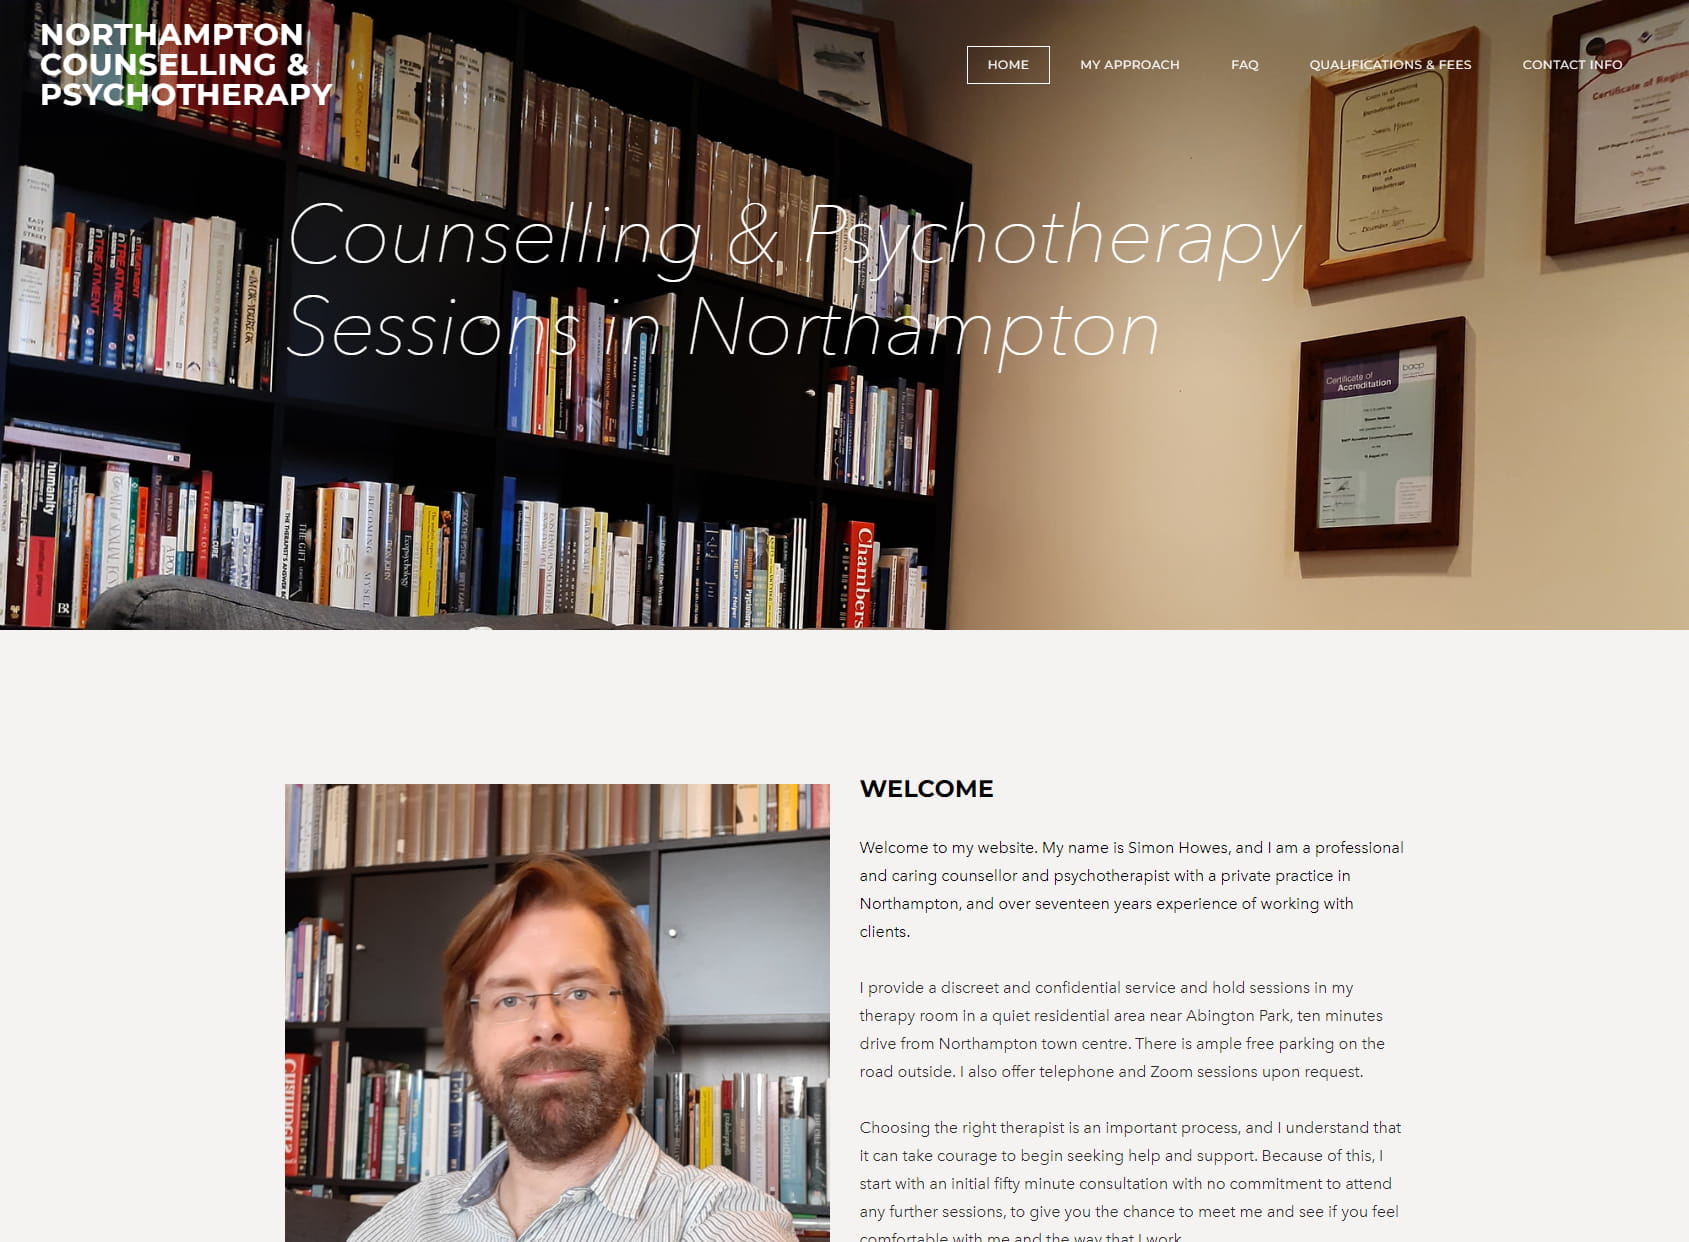 Northampton Counselling and Psychotherapy - Simon Howes, Dipl. Psych., MBACP, BA Hons.